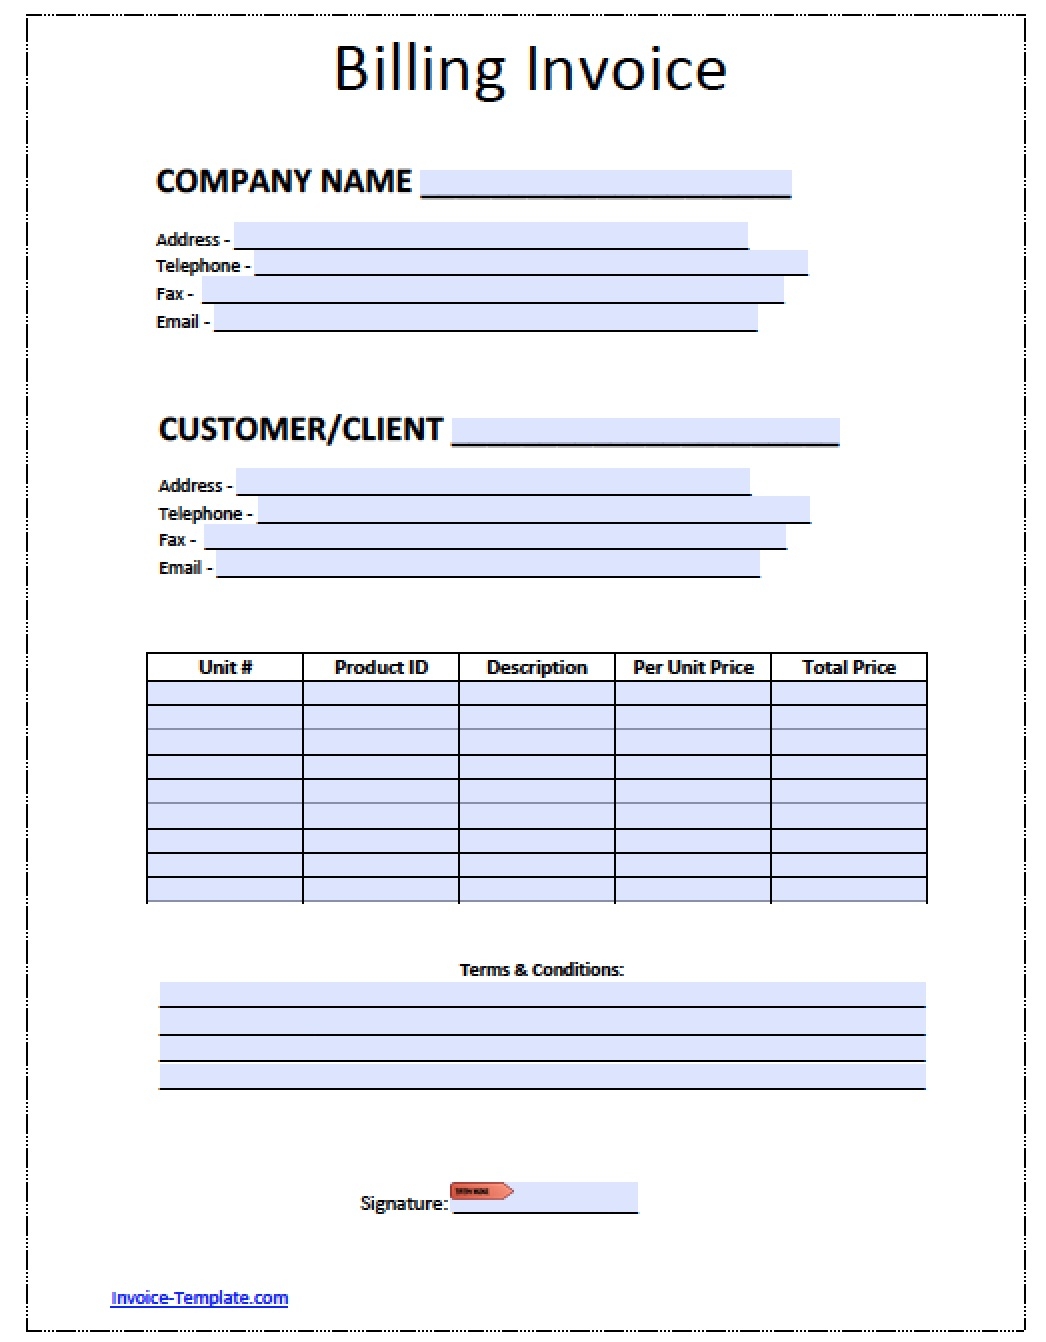 free billing invoice template excel pdf word doc billing invoice template word